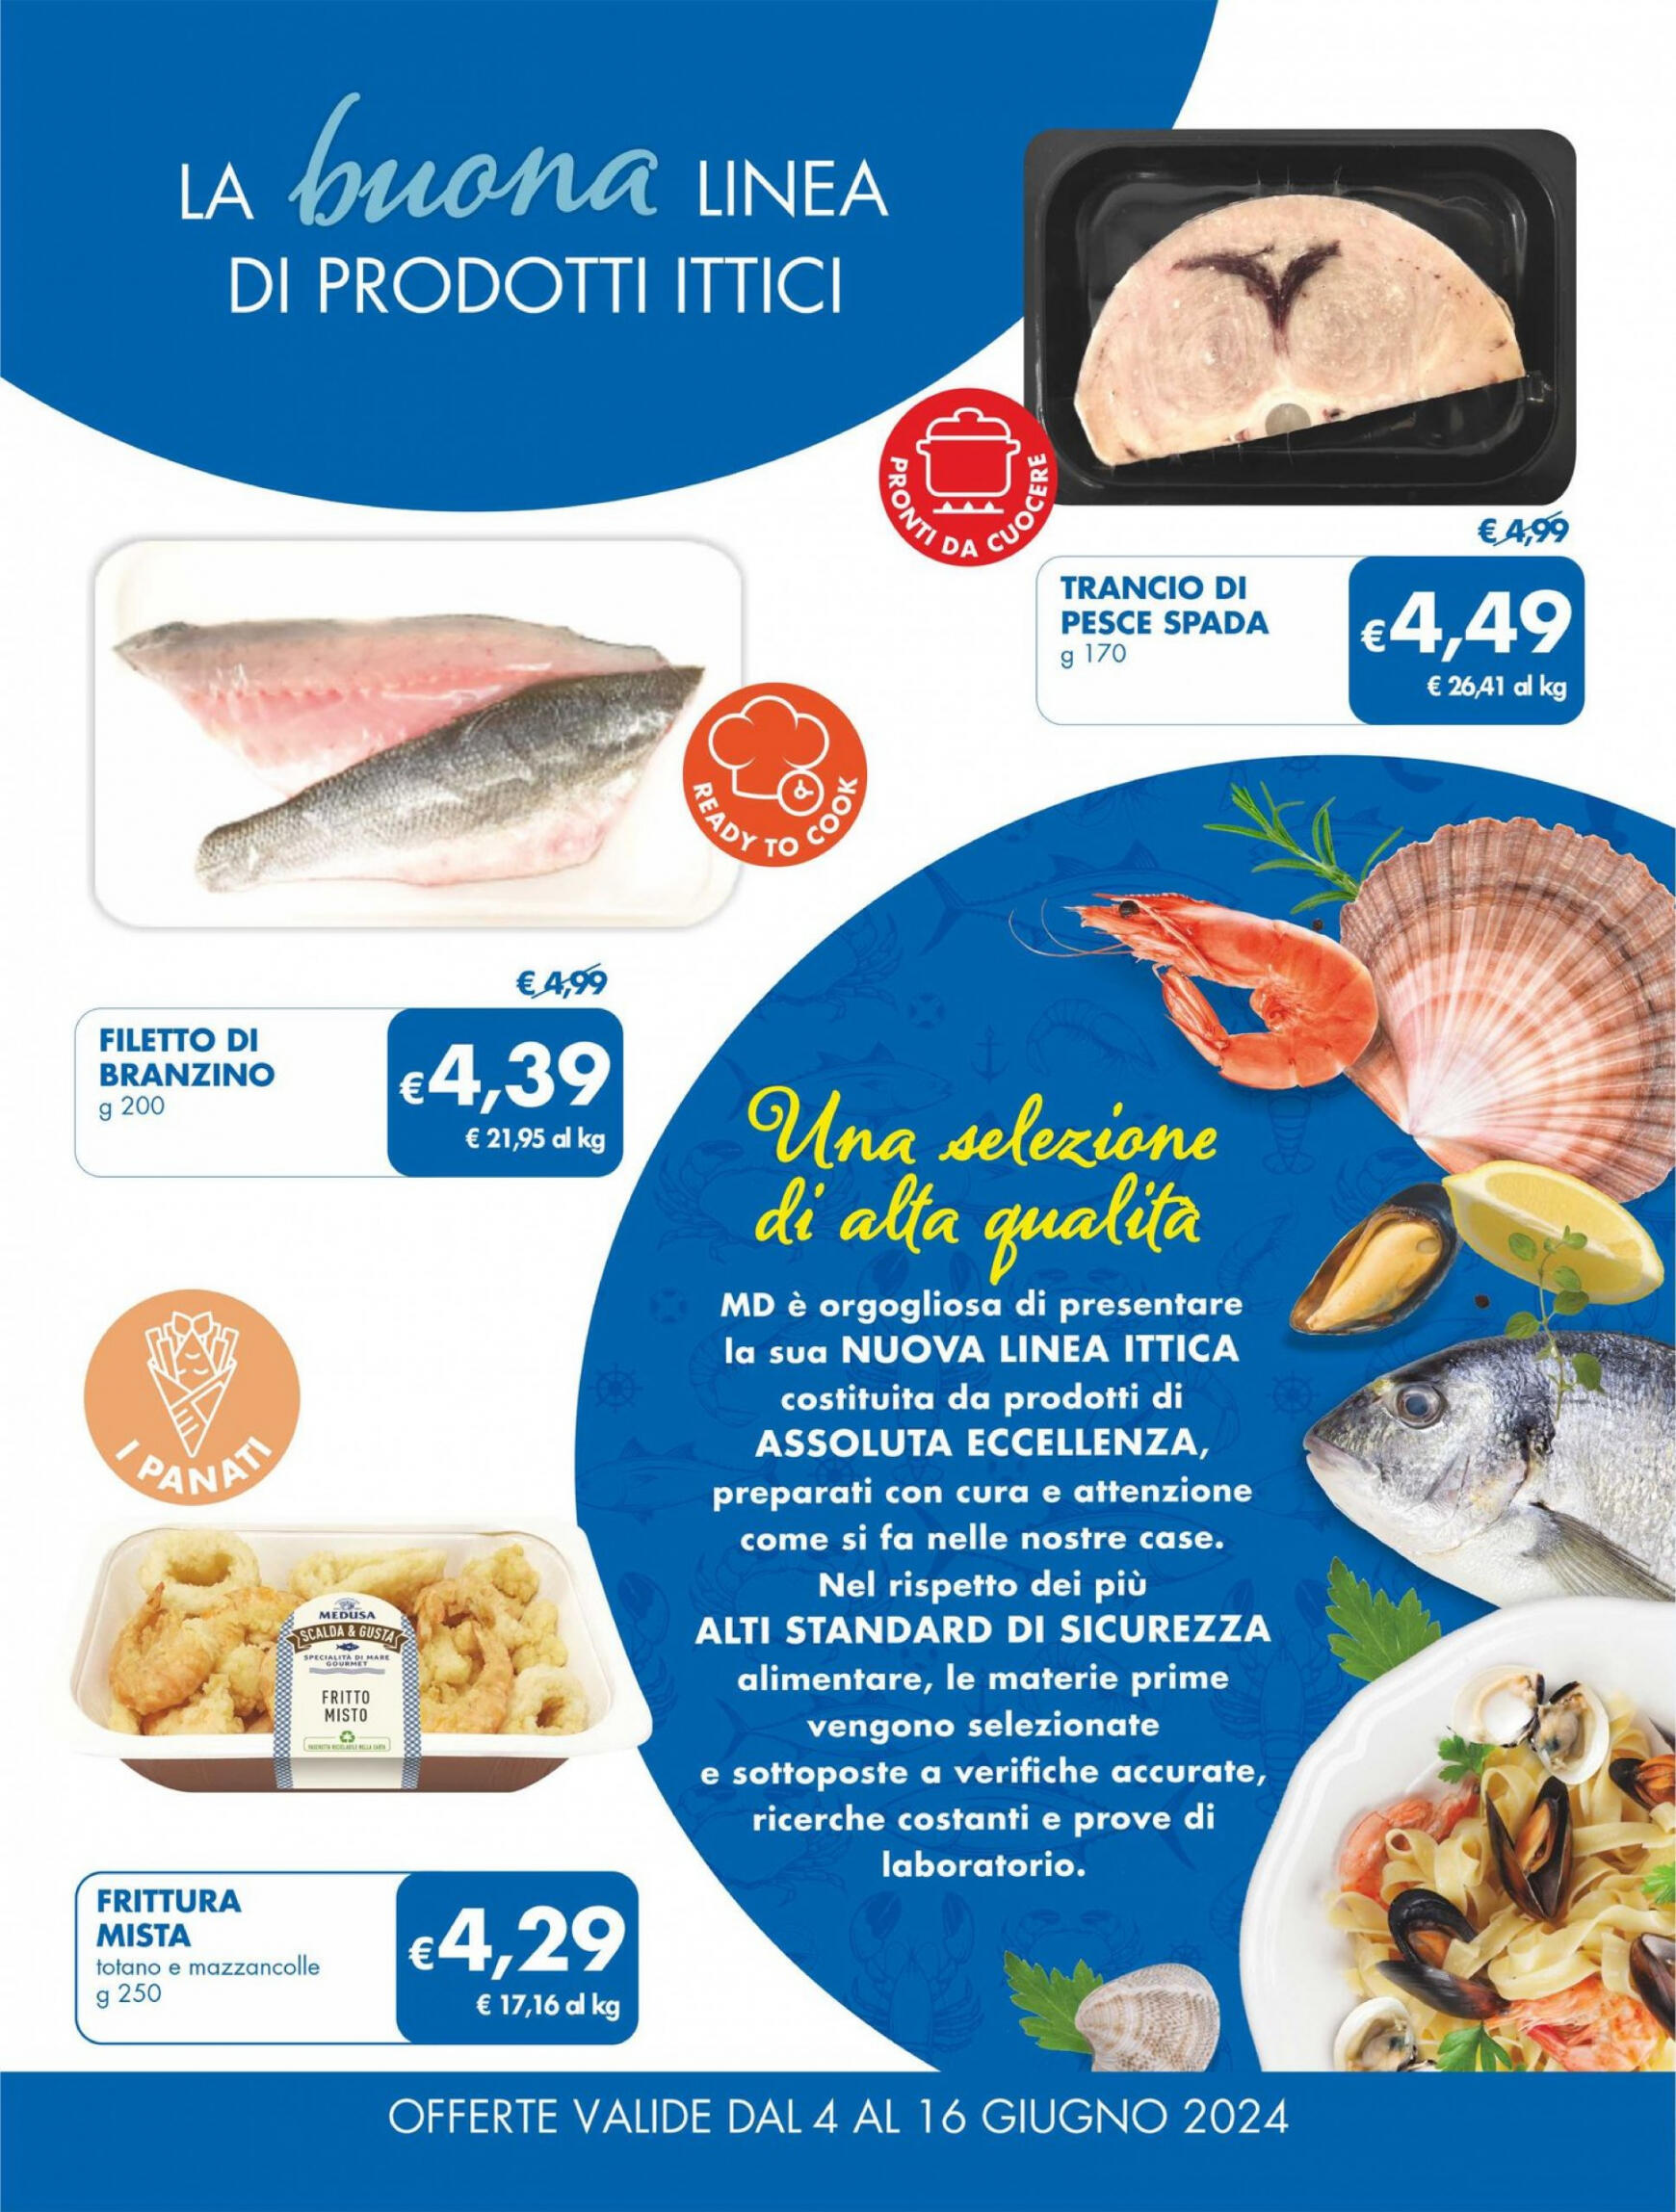 md-discount - Nuovo volantino MD 04.06. - 16.06. - page: 11